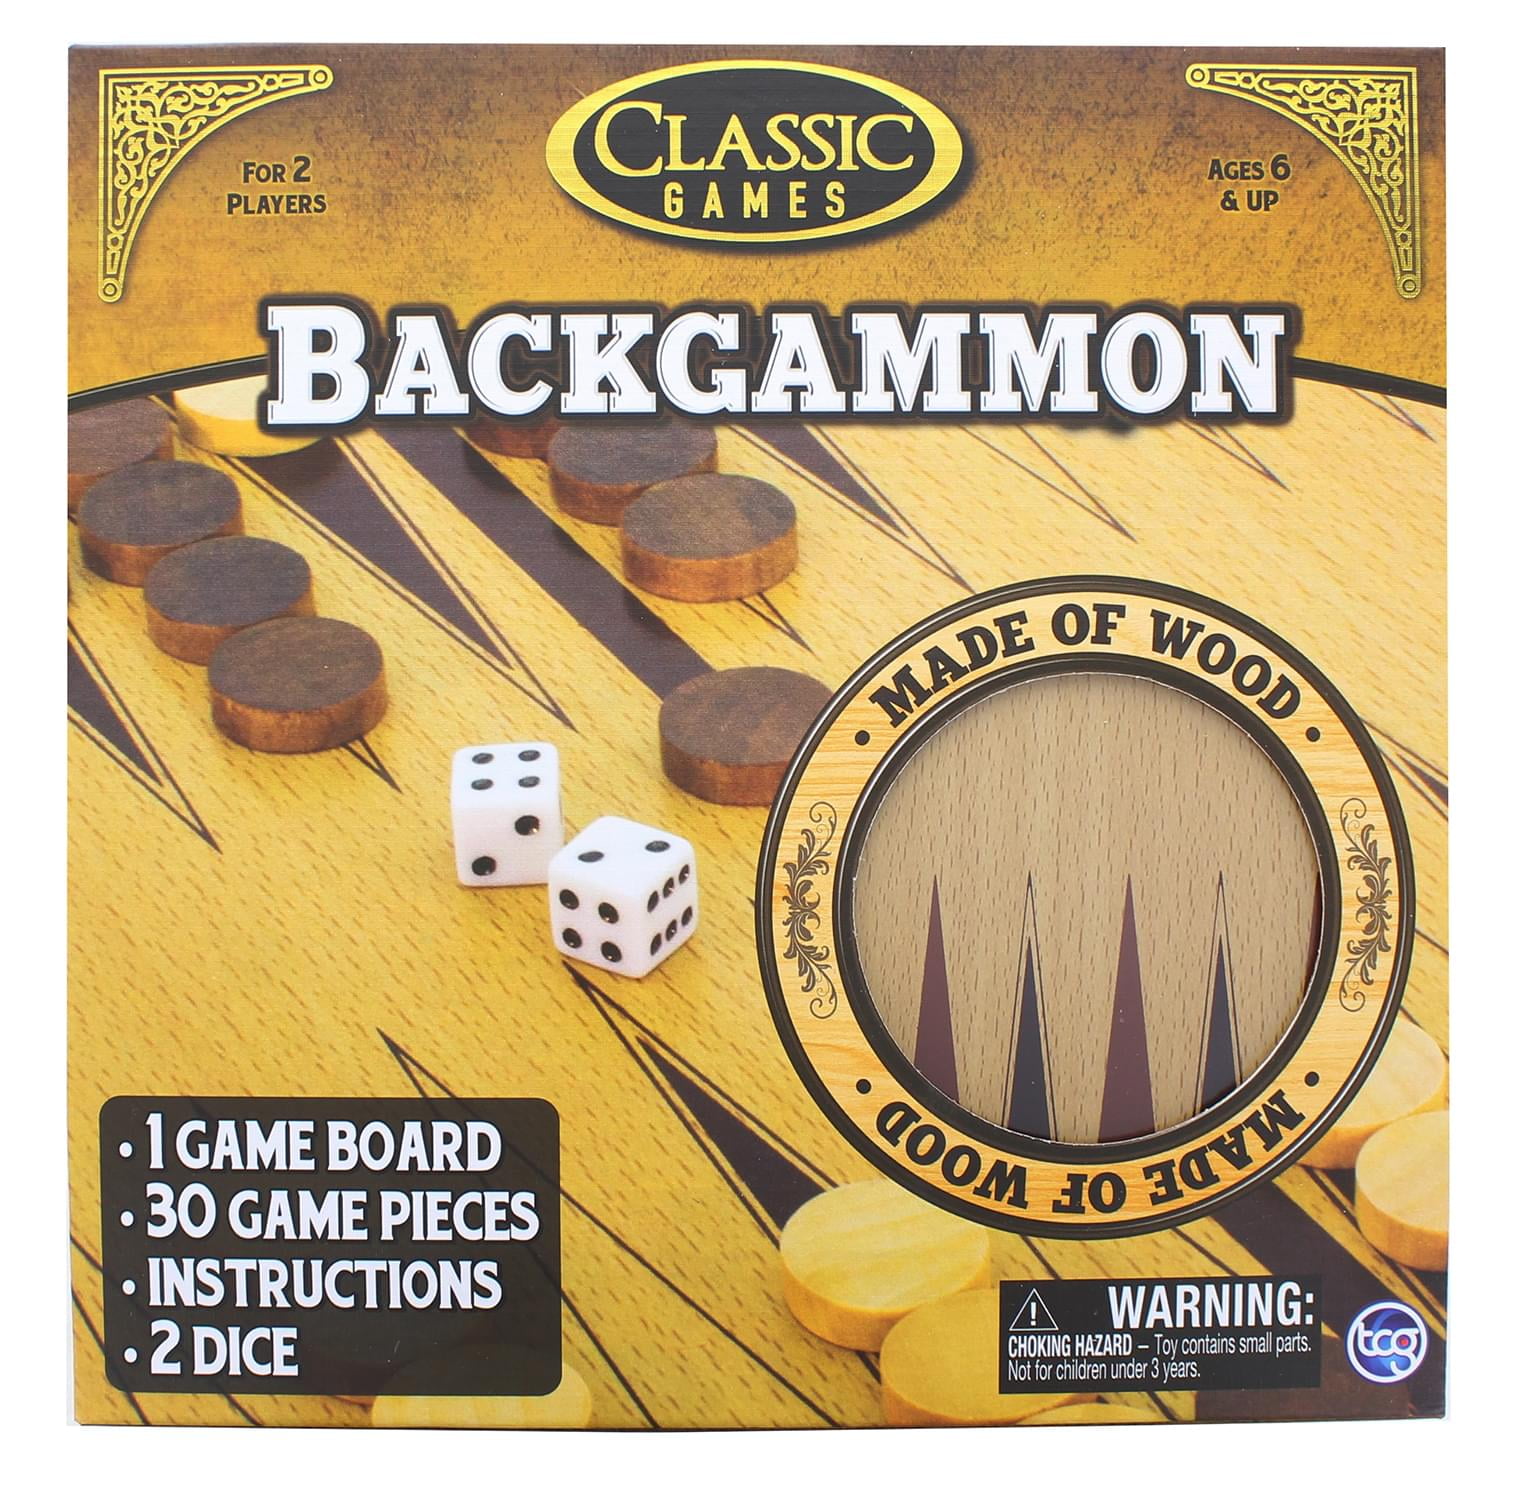 You Pick Backgammon Replacement Pieces 7/8" Brown & White/Cream 